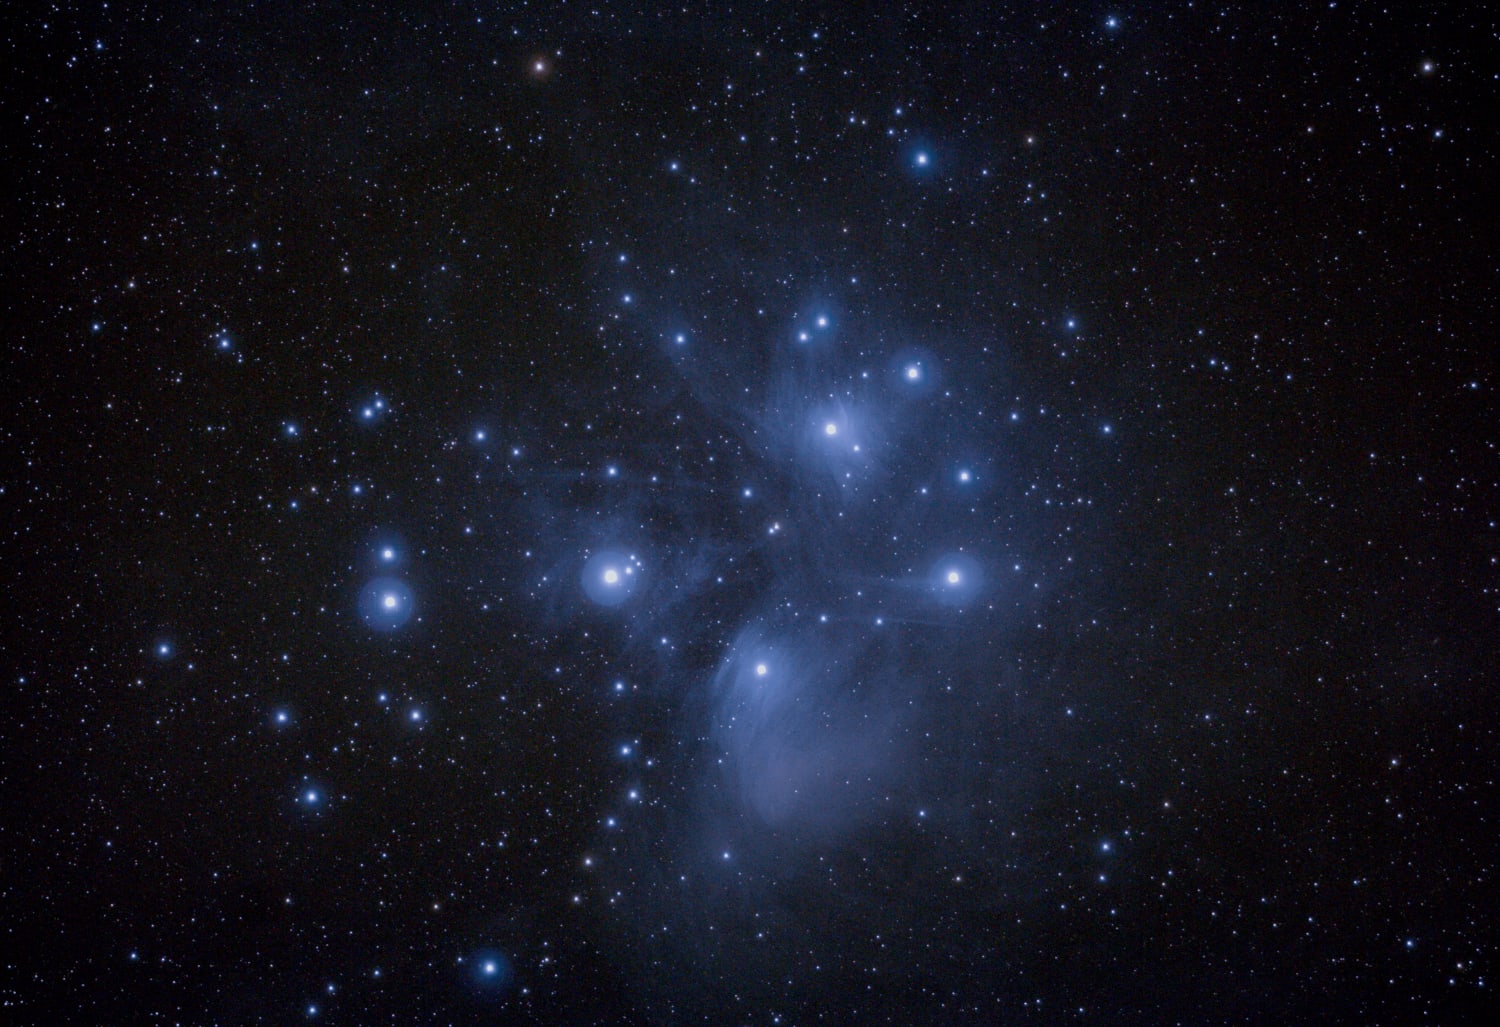 My picture of the Pleiades star cluster up close